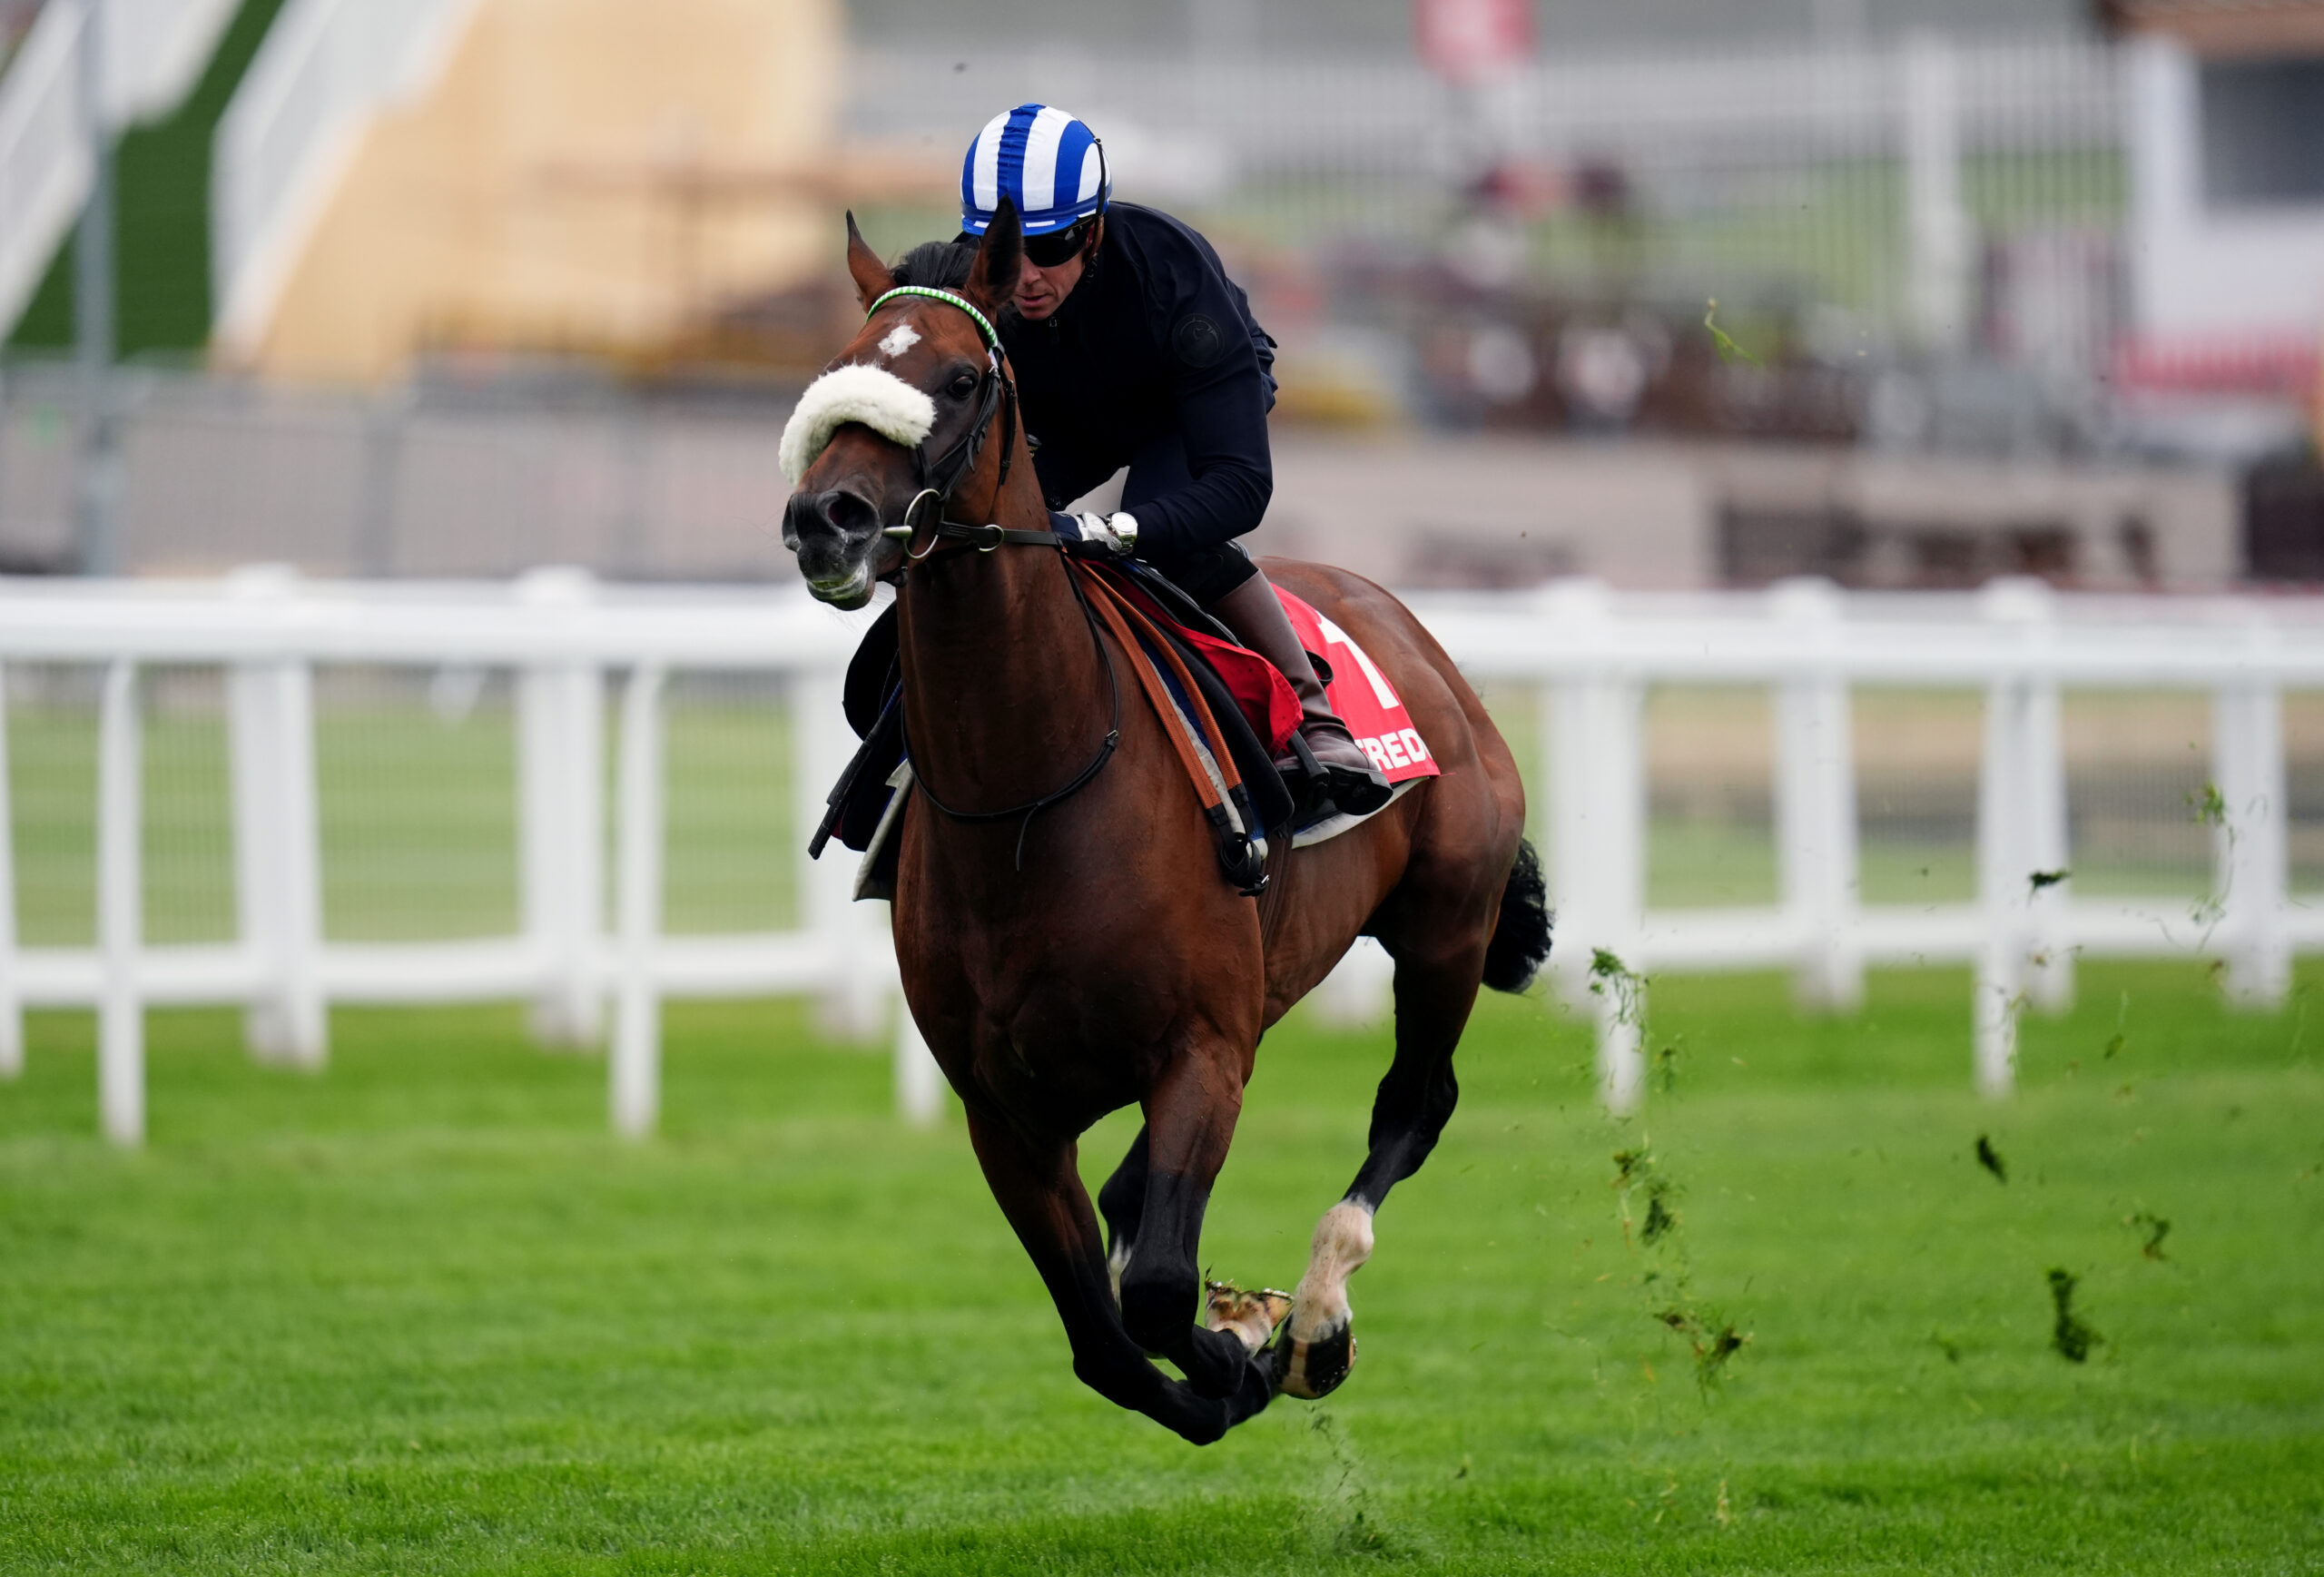 Irish Derby to come underconsideration for Deira Mile